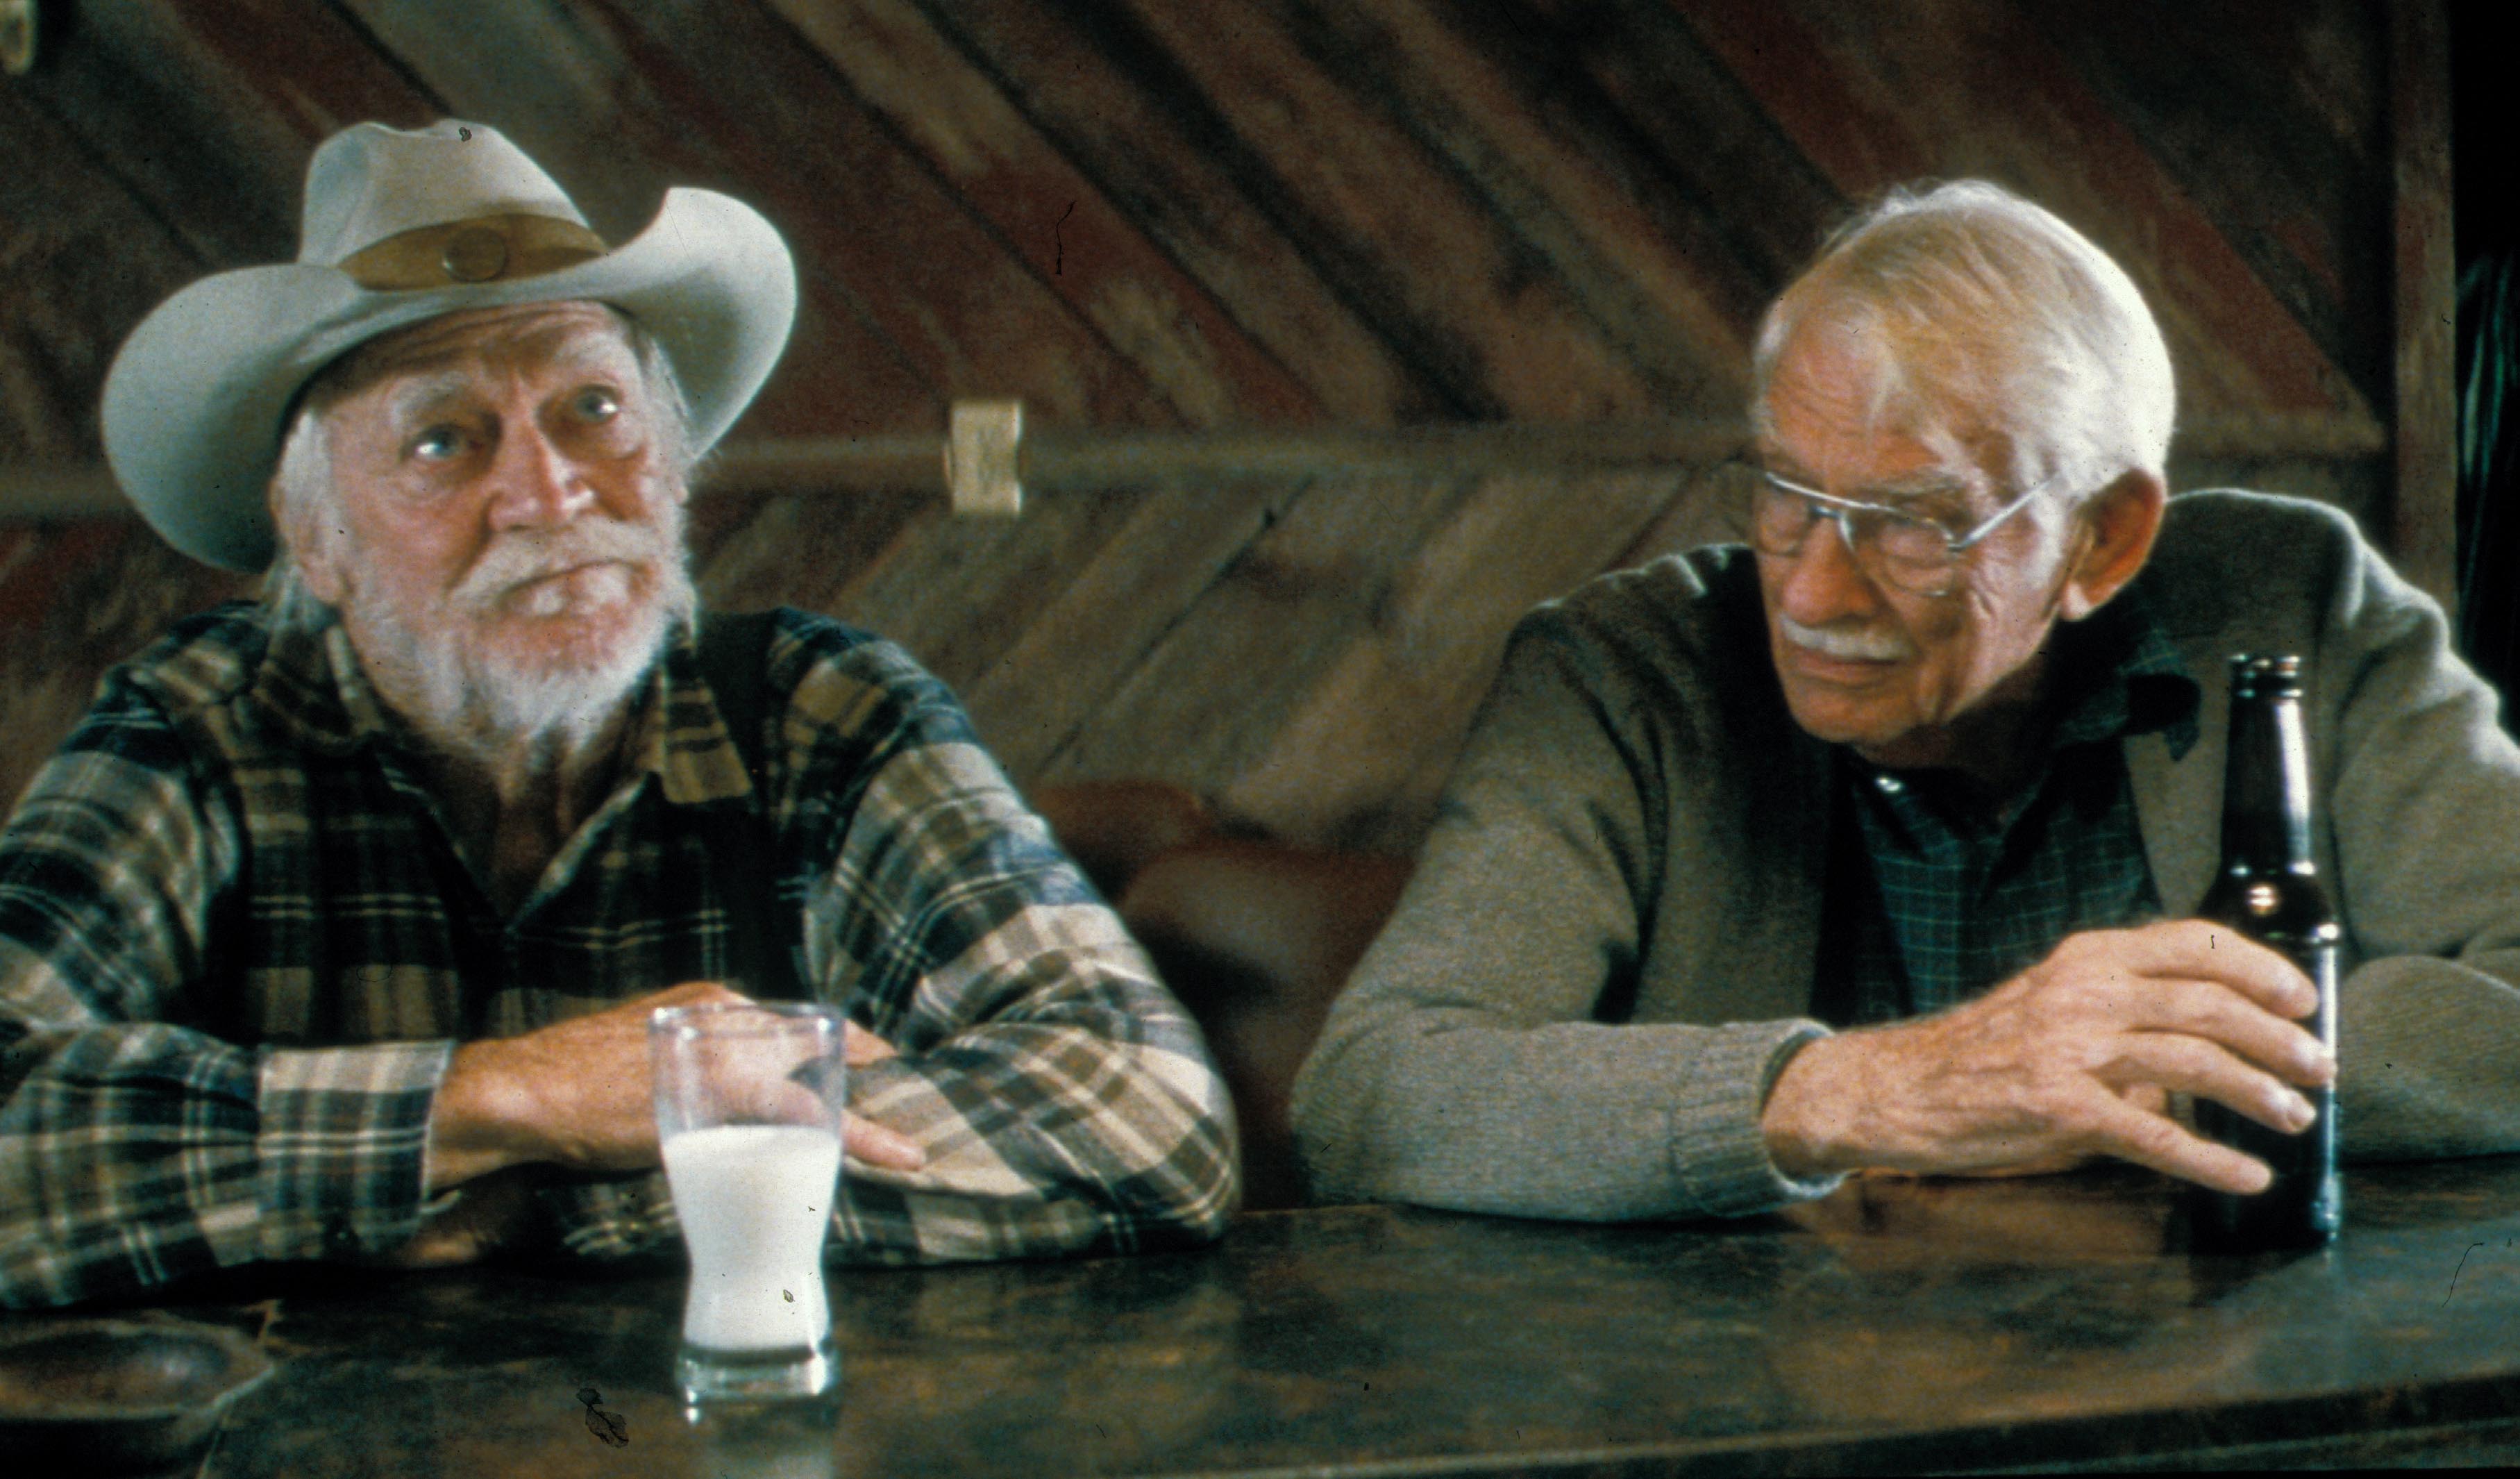 Editorial use only. No book cover usage.Mandatory Credit: Photo by Moviestore/Shutterstock (1650508a) The Straight Story, Richard Farnsworth, Wiley Harker Film and Television